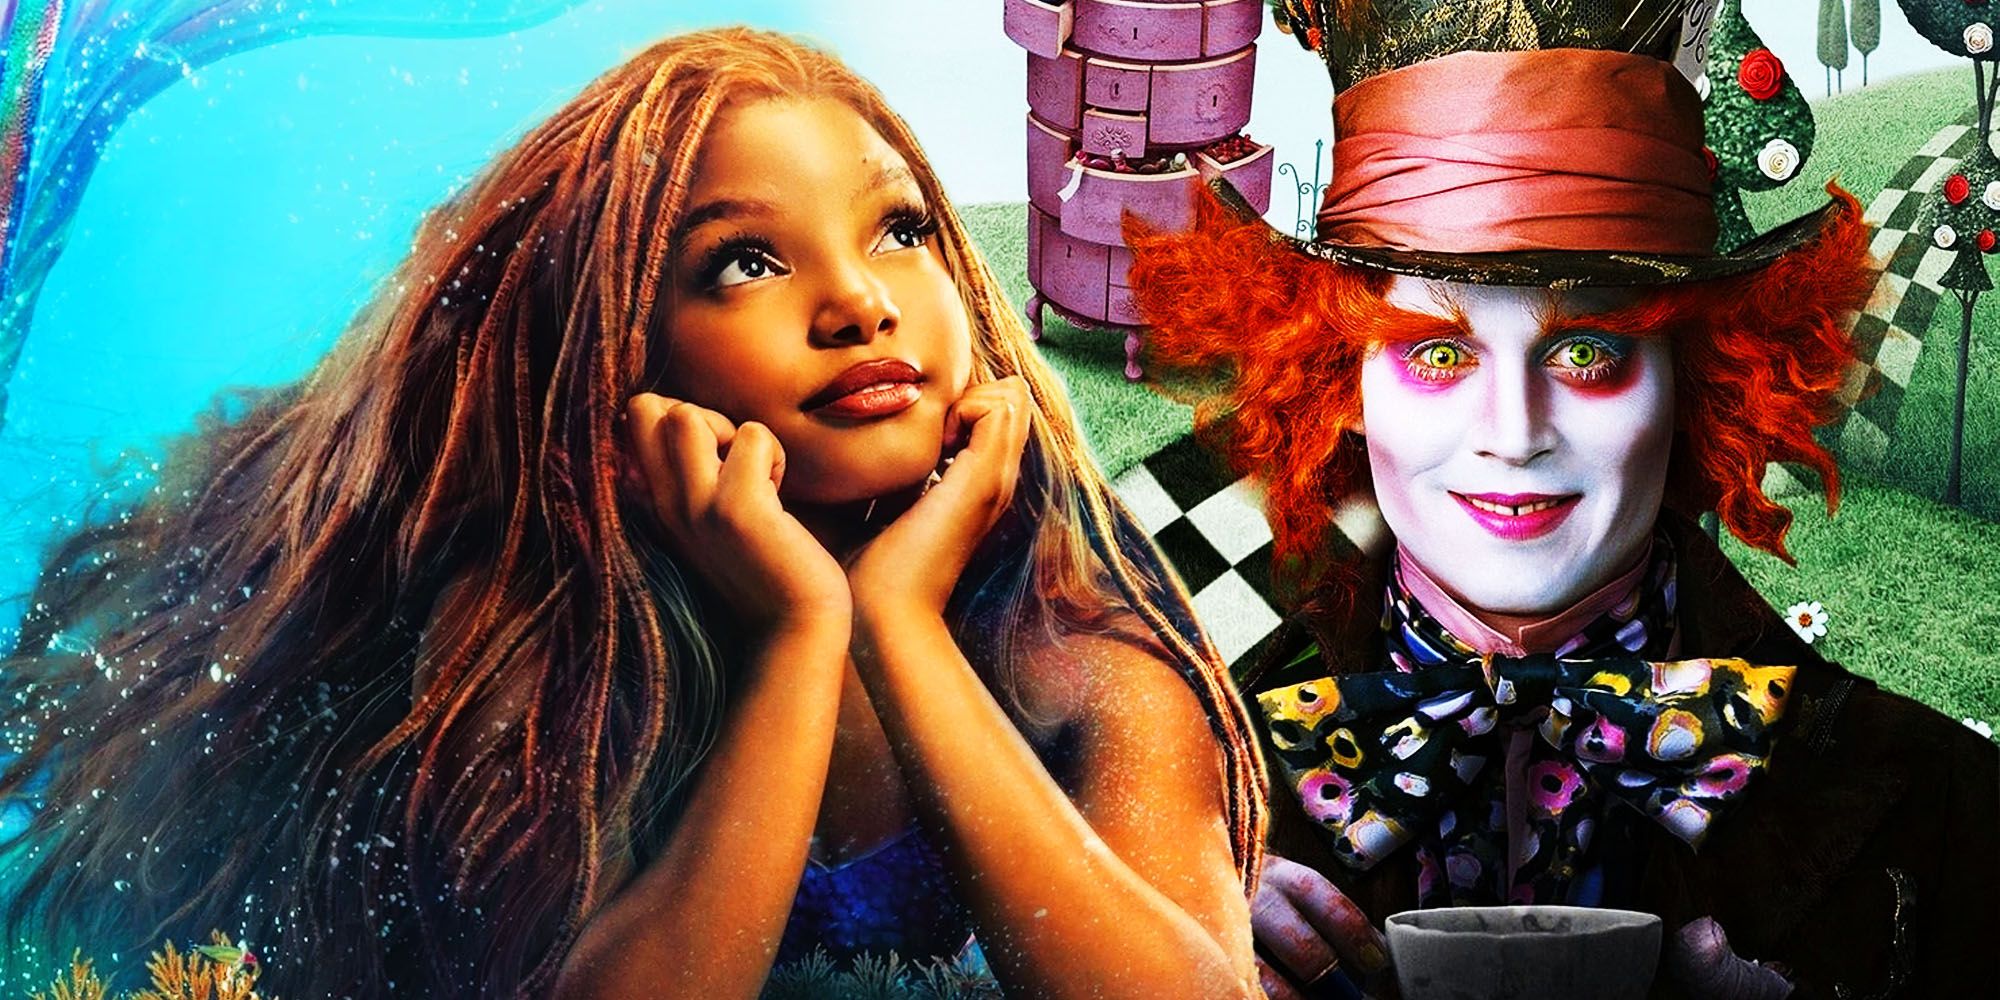 An image of Halle Bailey as The Little Mermaid and Johnny Depp as The Mad Hatter in Alice In Wonderland